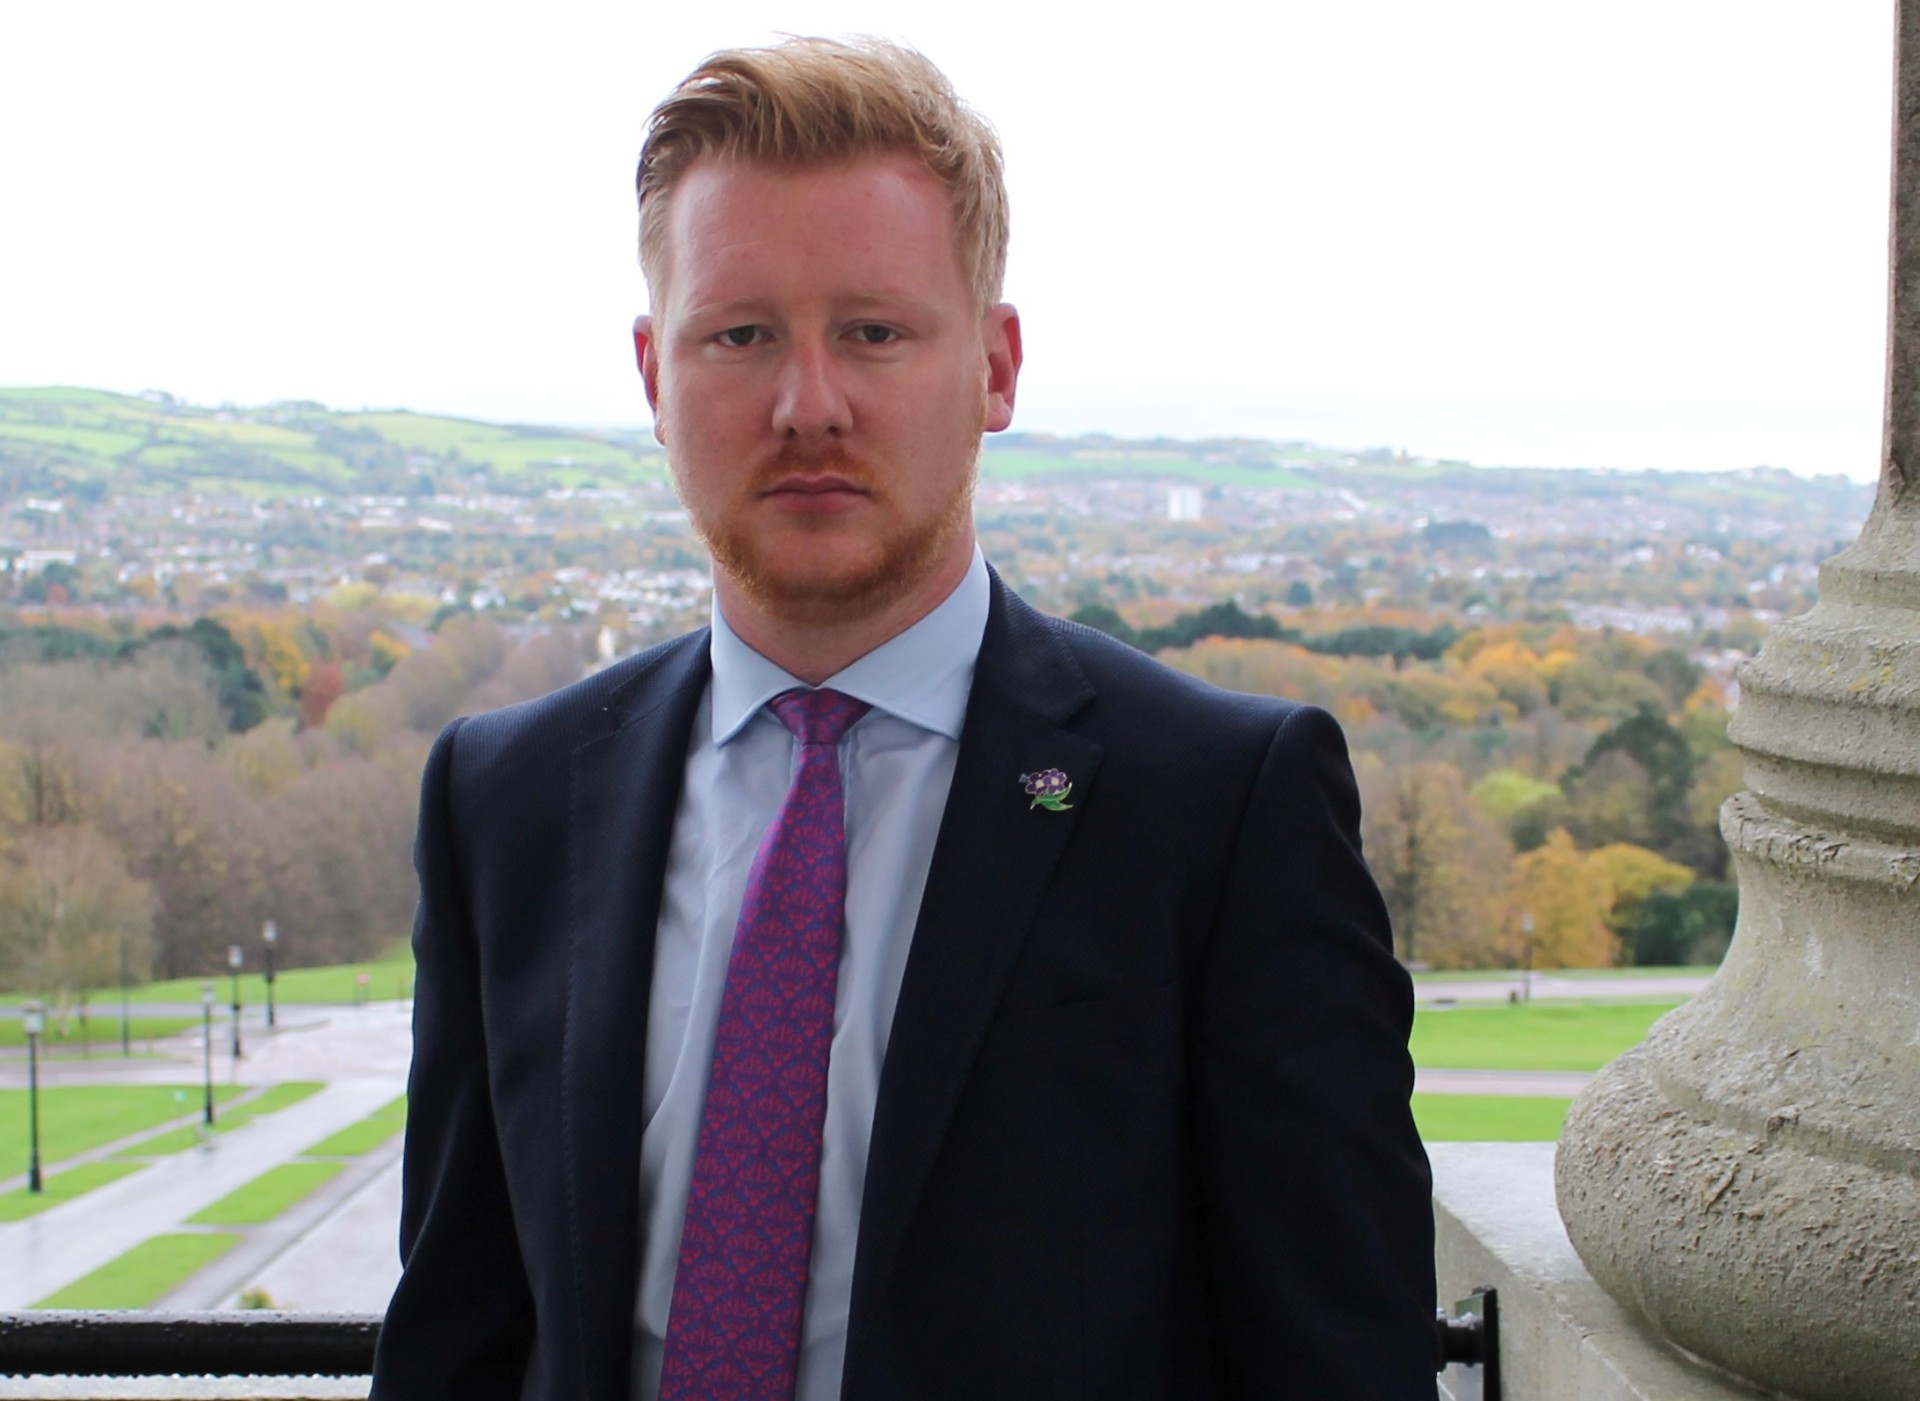 Constituent seeks compensation from SDLP MLA who used data